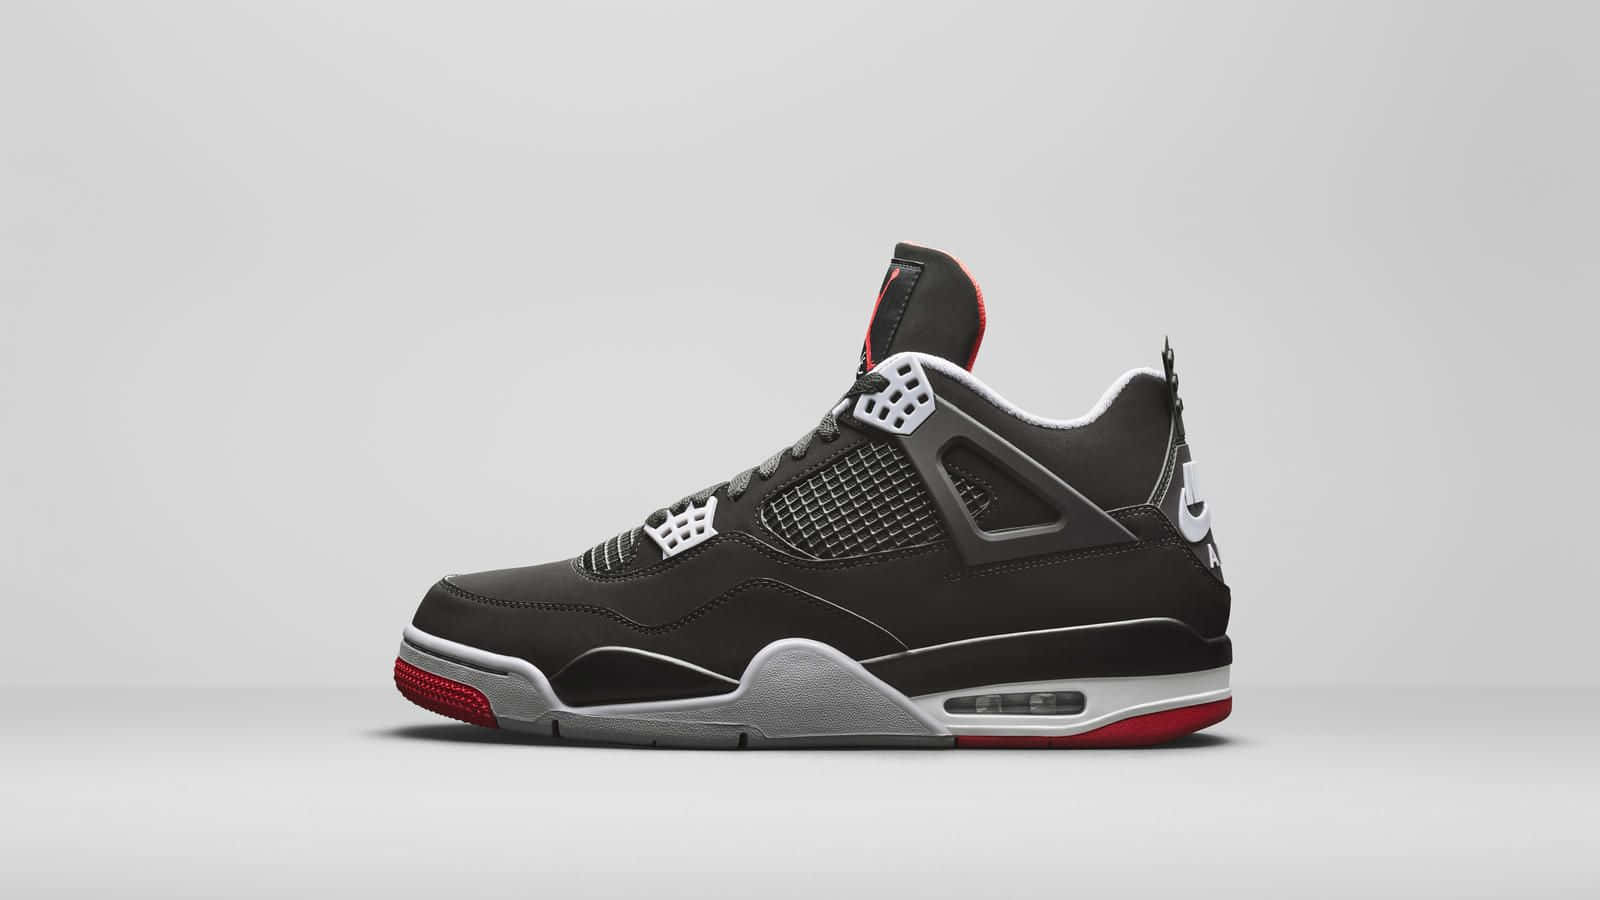 Get Your Hands On The Iconic Air Jordan 4 Wallpaper